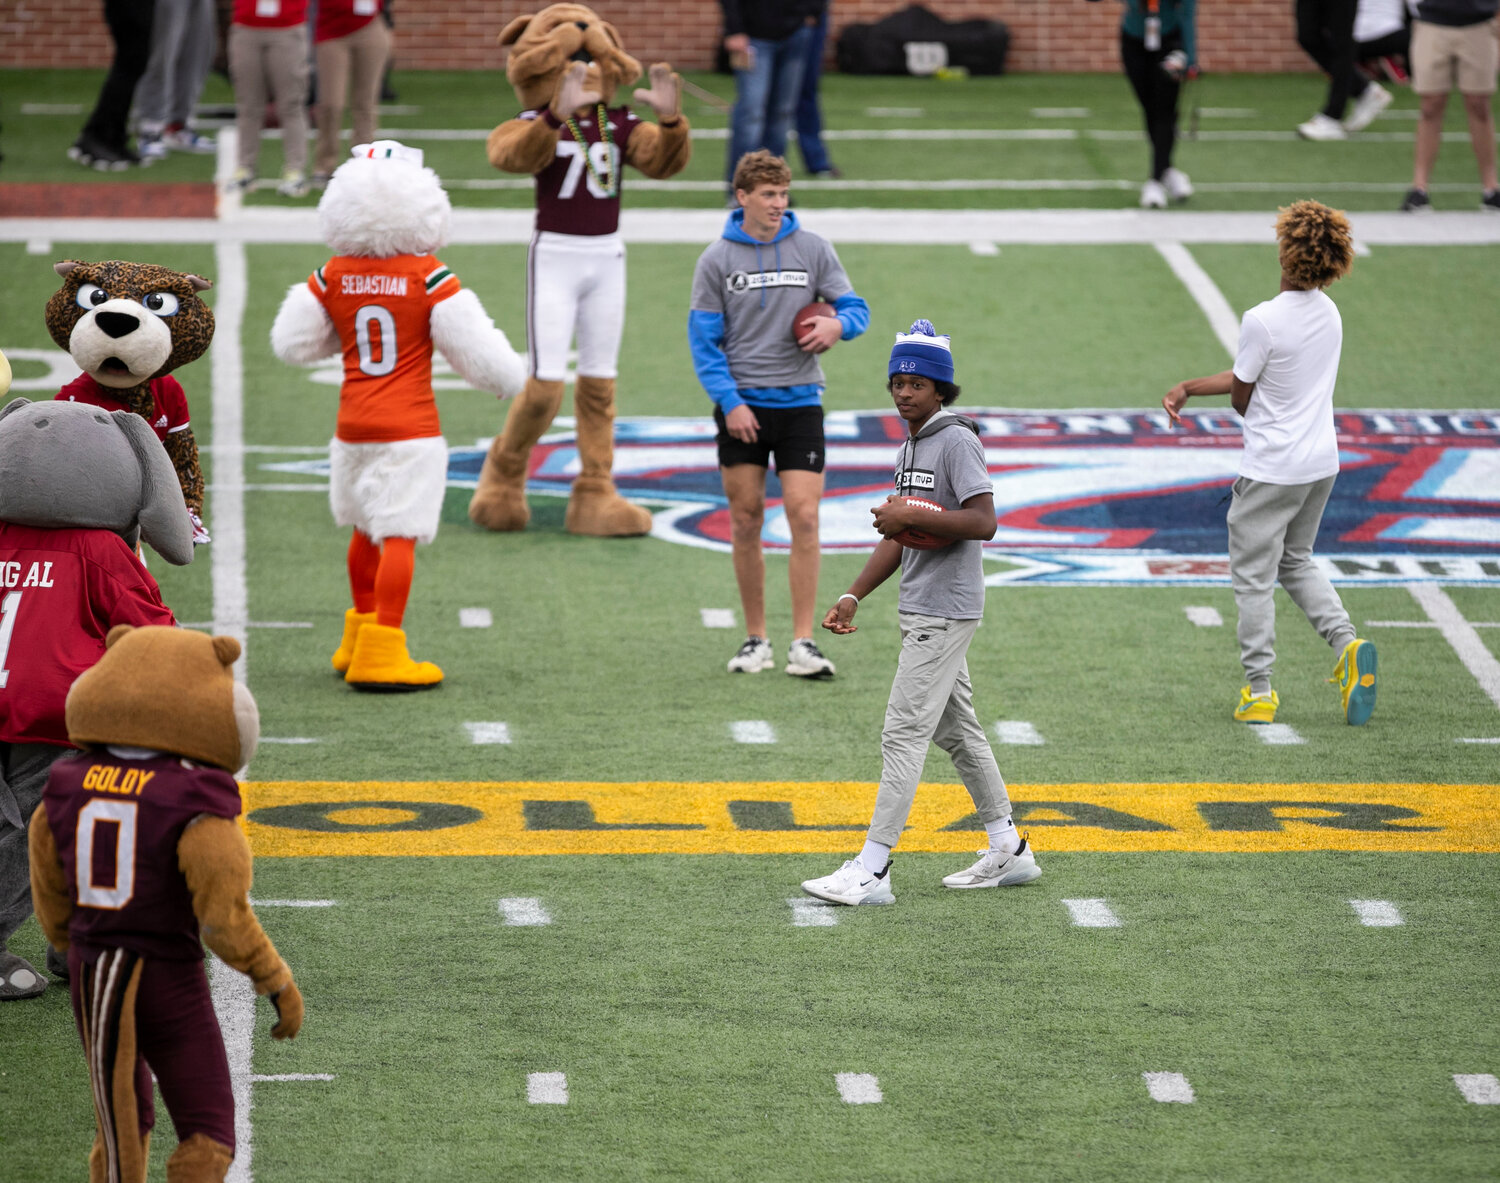 Bayside Academy sophomore Sammy Dunn (beanie) won the Class of 2026 MVP at QB Country’s Senior Bowl high school camp and got the chance to compete in an on-field throwing competition with college football mascots during an intermission of Saturday’s Senior Bowl contest at Hancock Whitney Stadium in Mobile. Although Dunn delivered an accurate ball to the UNC Tar Heel, the pass fell incomplete.